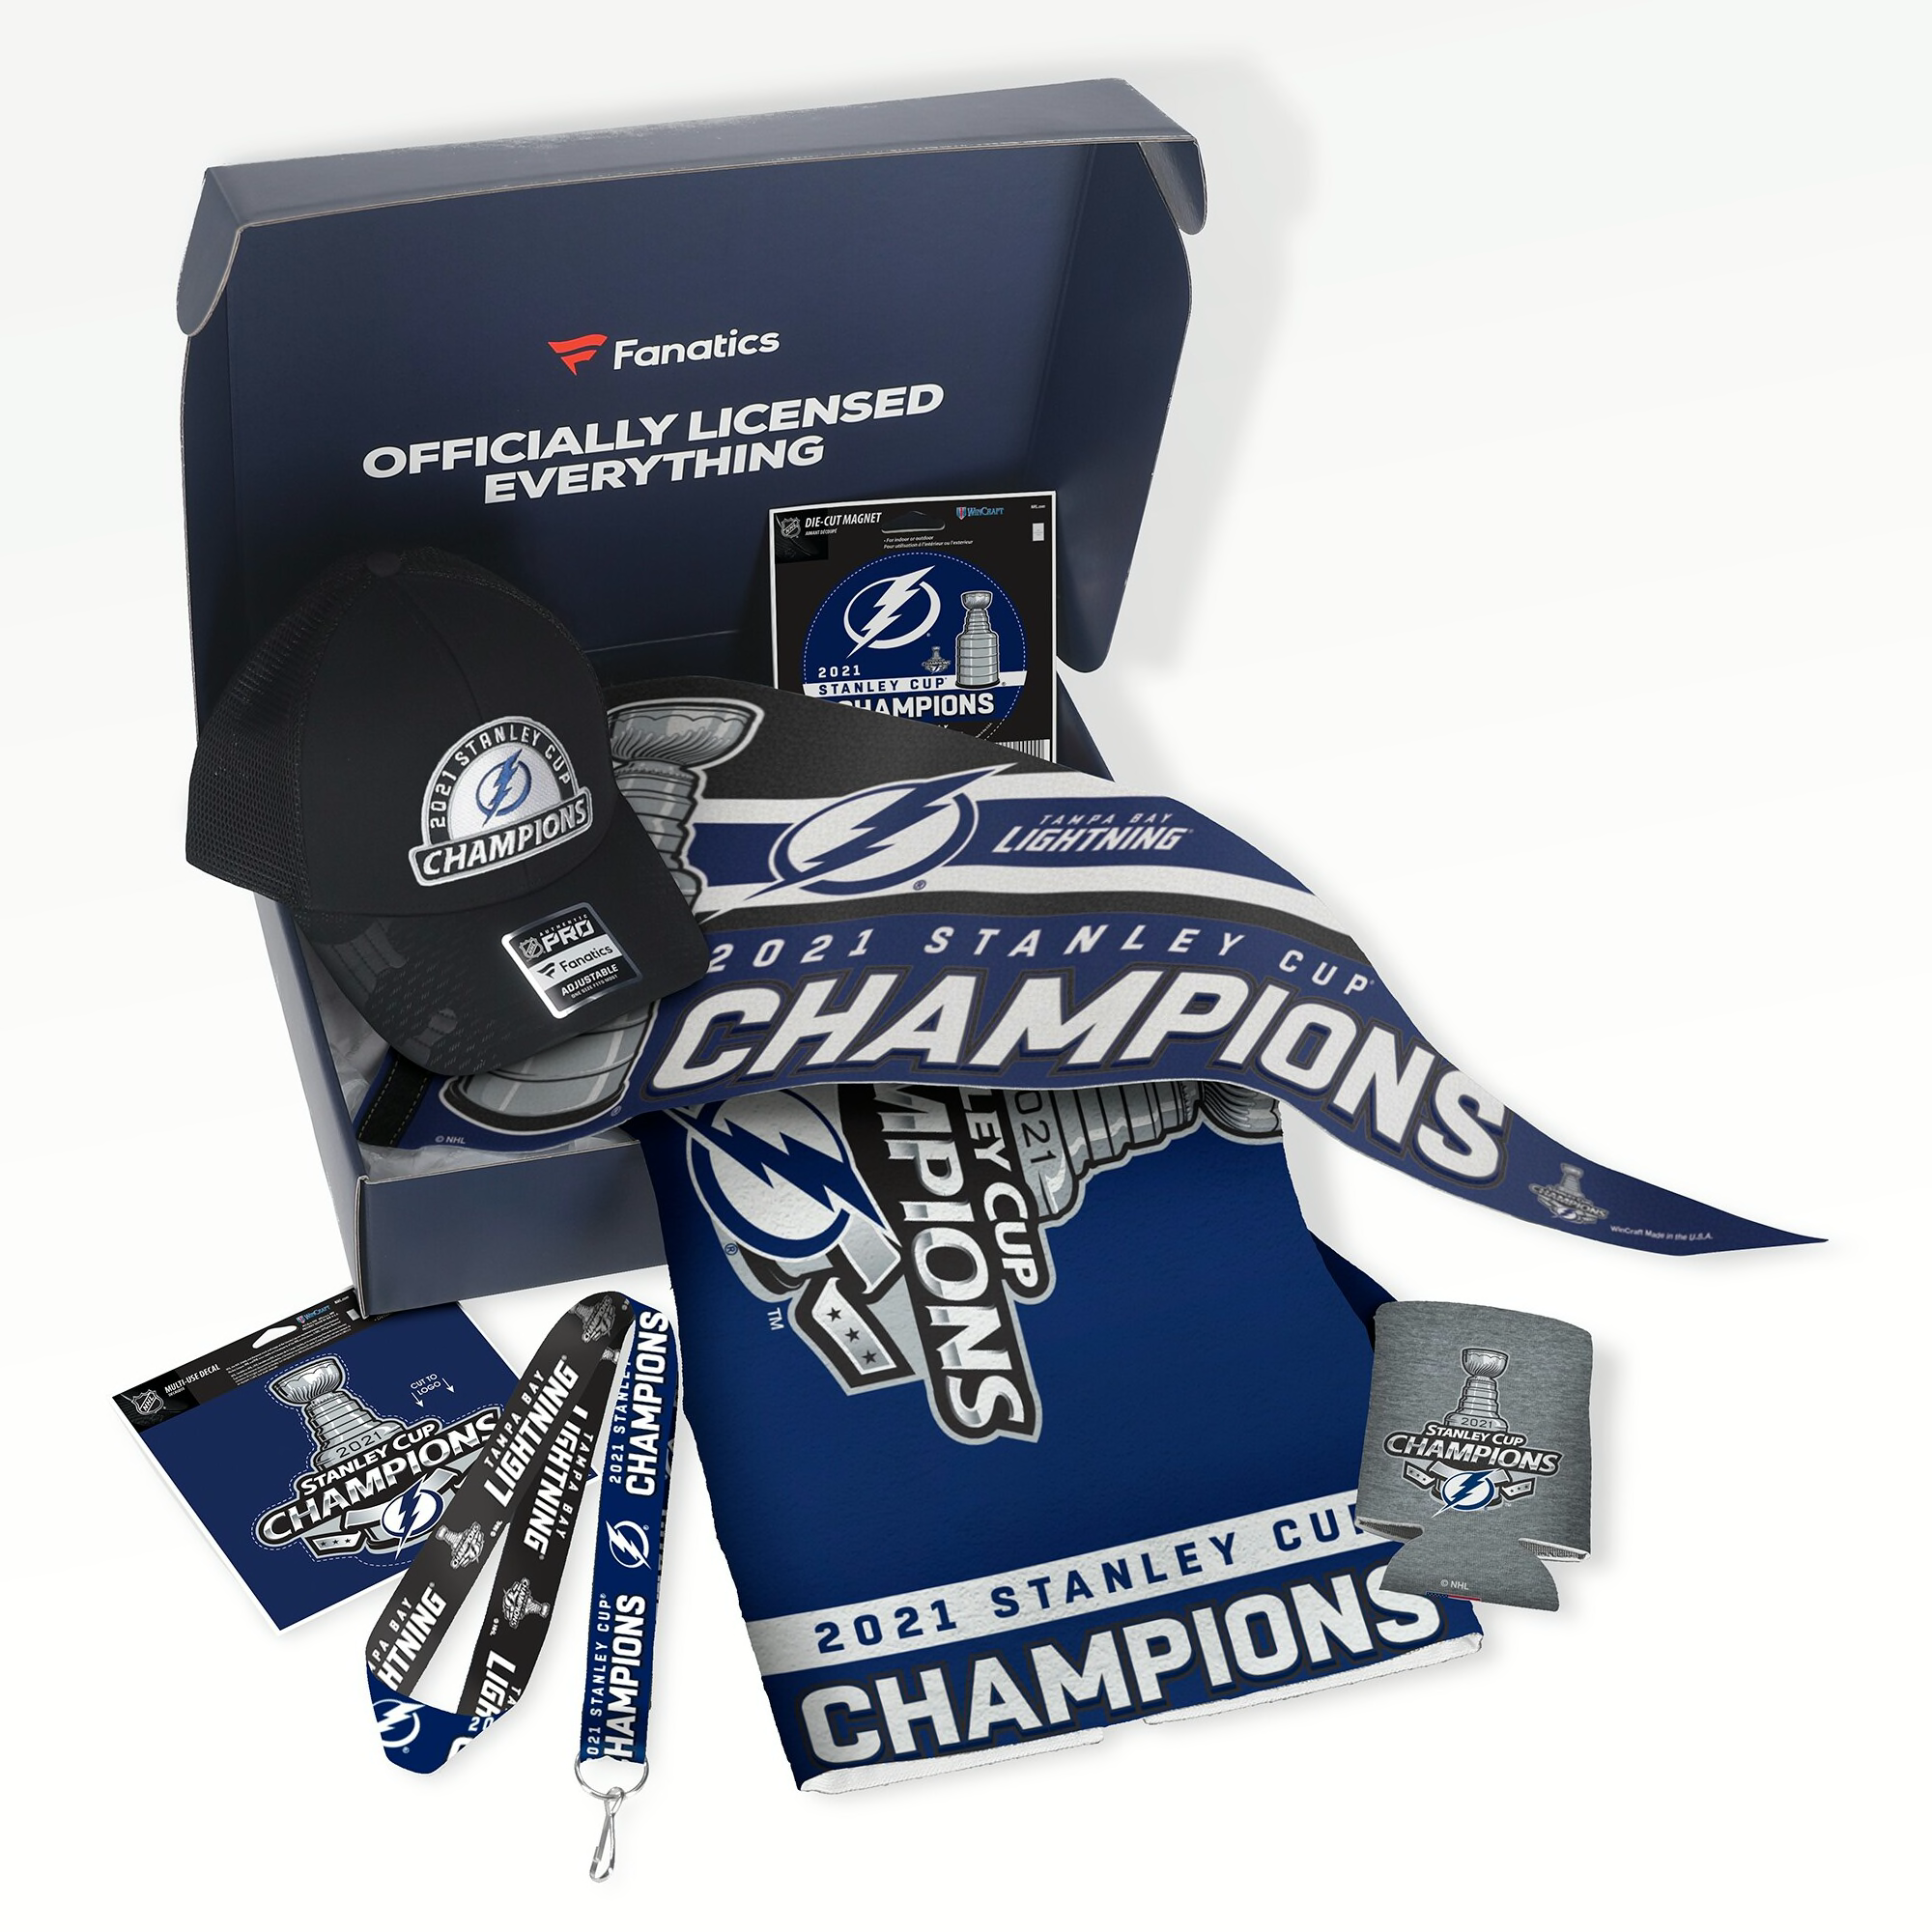 Back To Back For The Bolts Gear Up Tampa Bay Lightning Fans